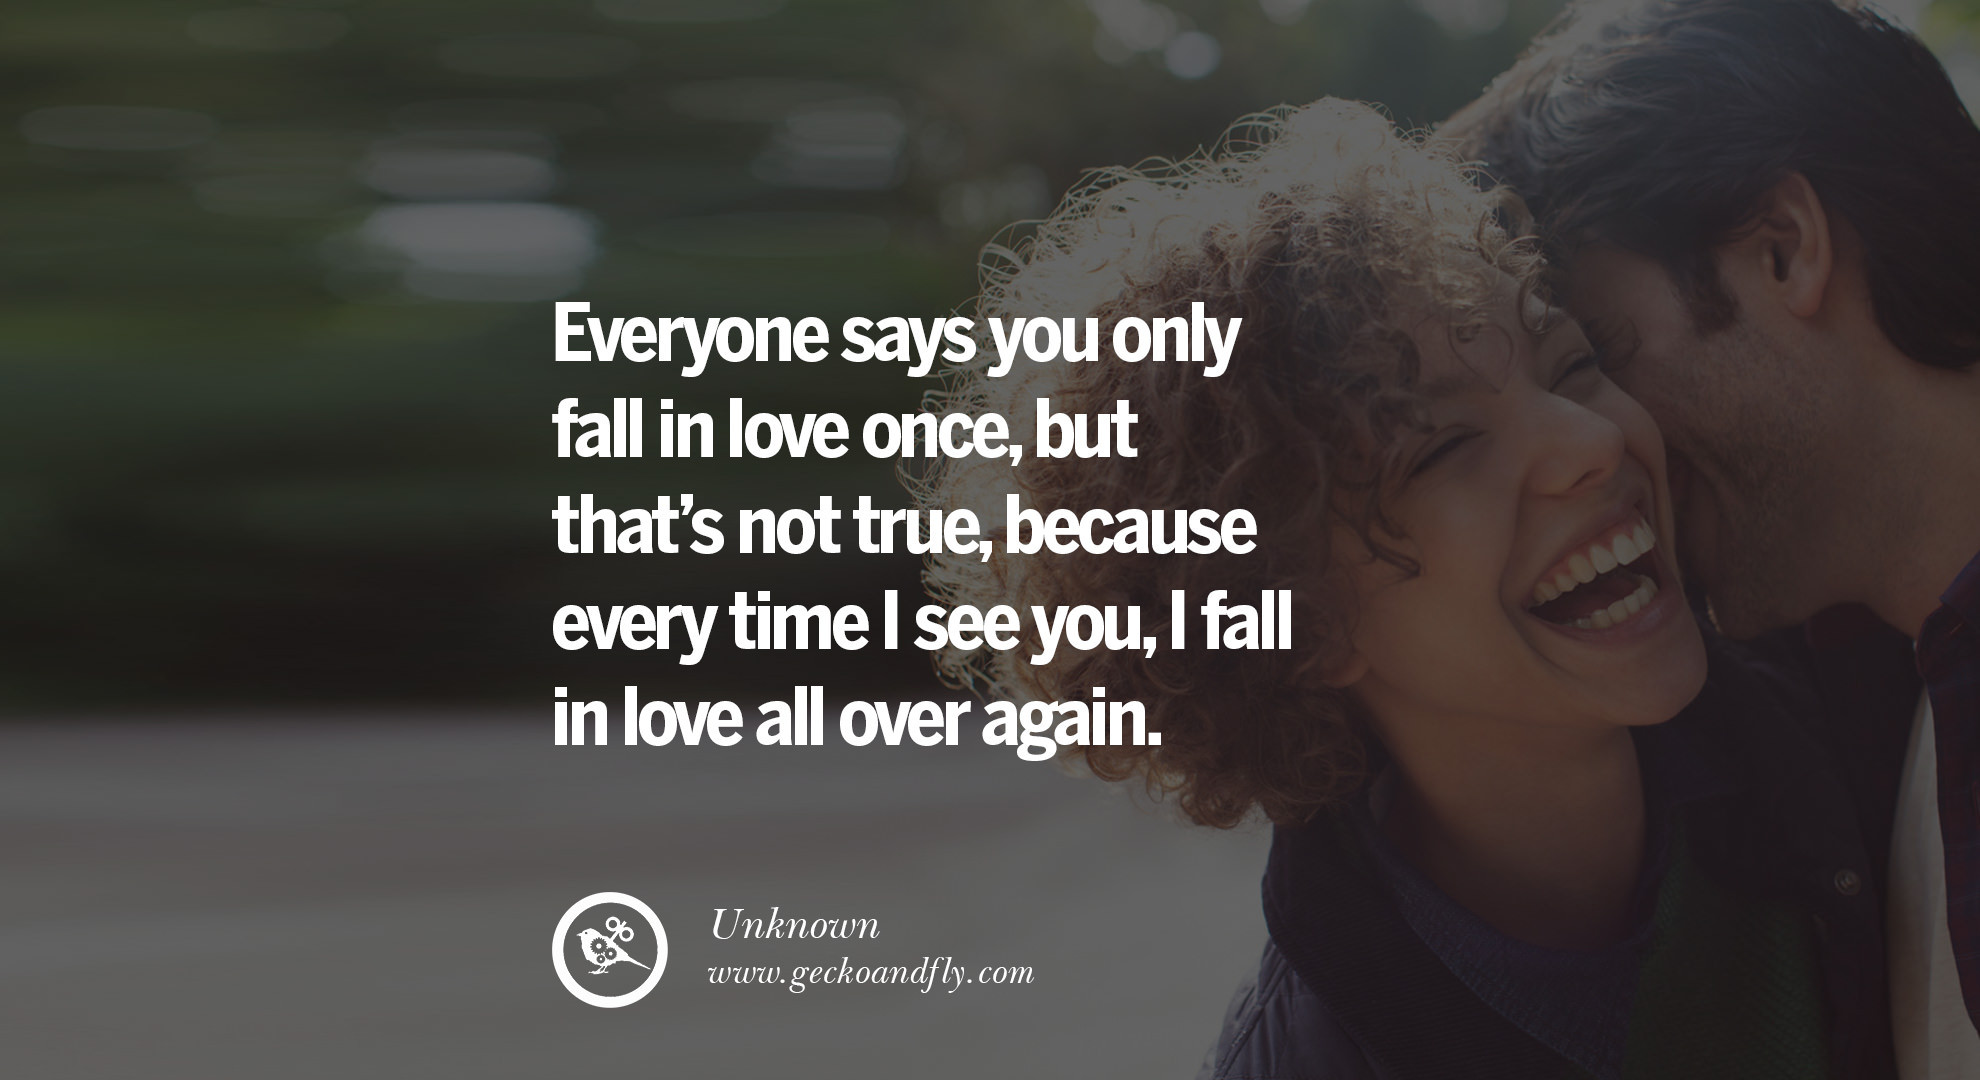 Quotes On Romantic
 40 Romantic Quotes about Love Life Marriage and